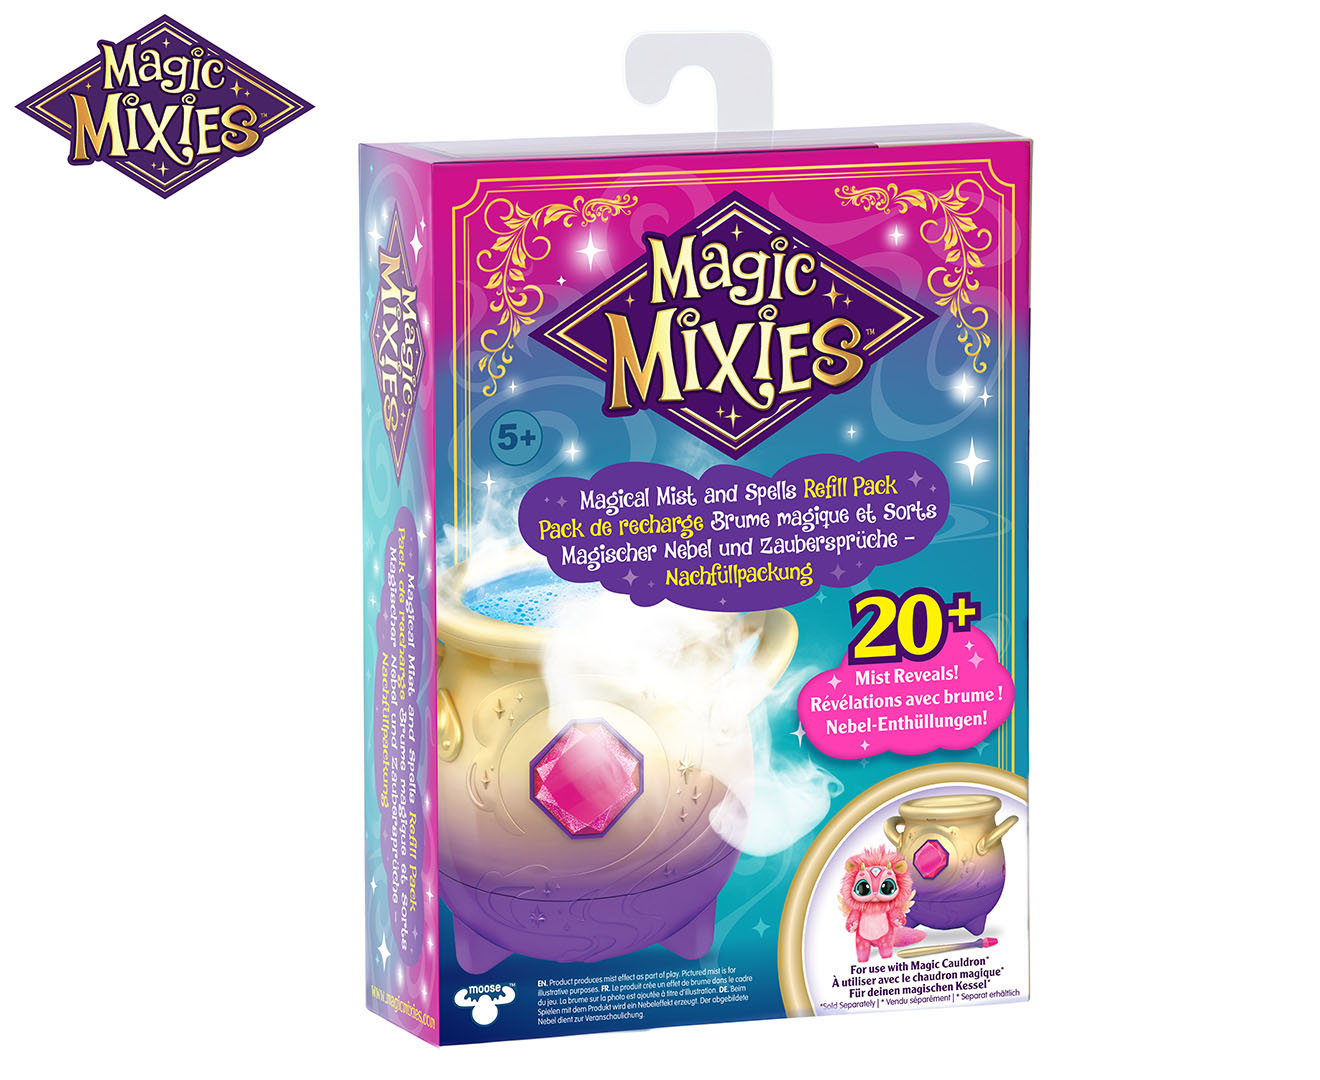 NEW - Magic Mixies - 2 New Spells and 20+ Mist Refill Pack - UK